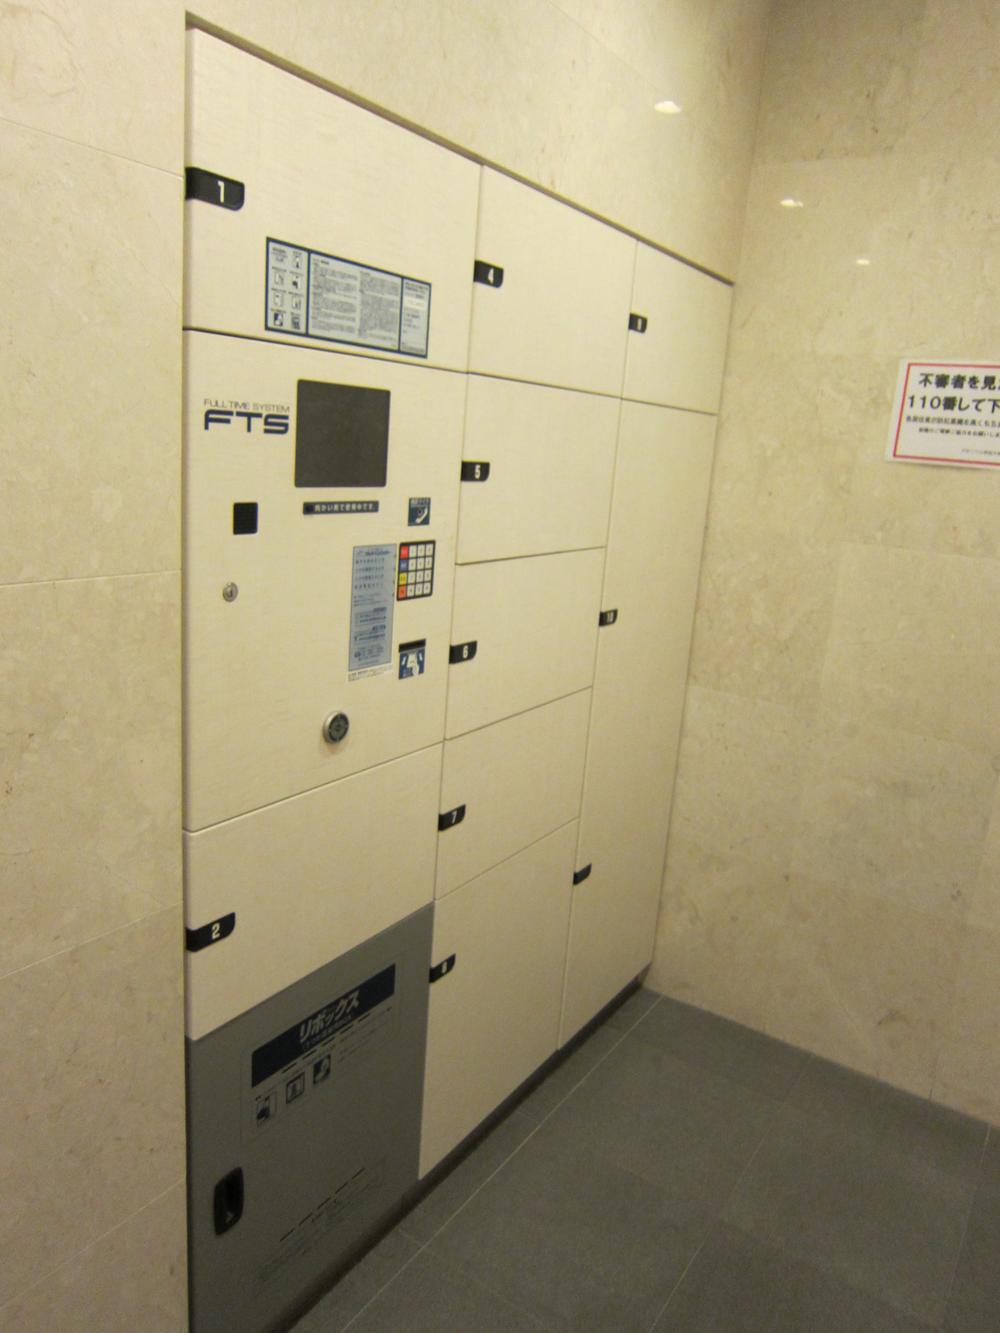 Other common areas. Is a 24-hour home delivery locker receipt of home delivery products can be even at the time of absence. Luggage shipping and cleaning service is also available.